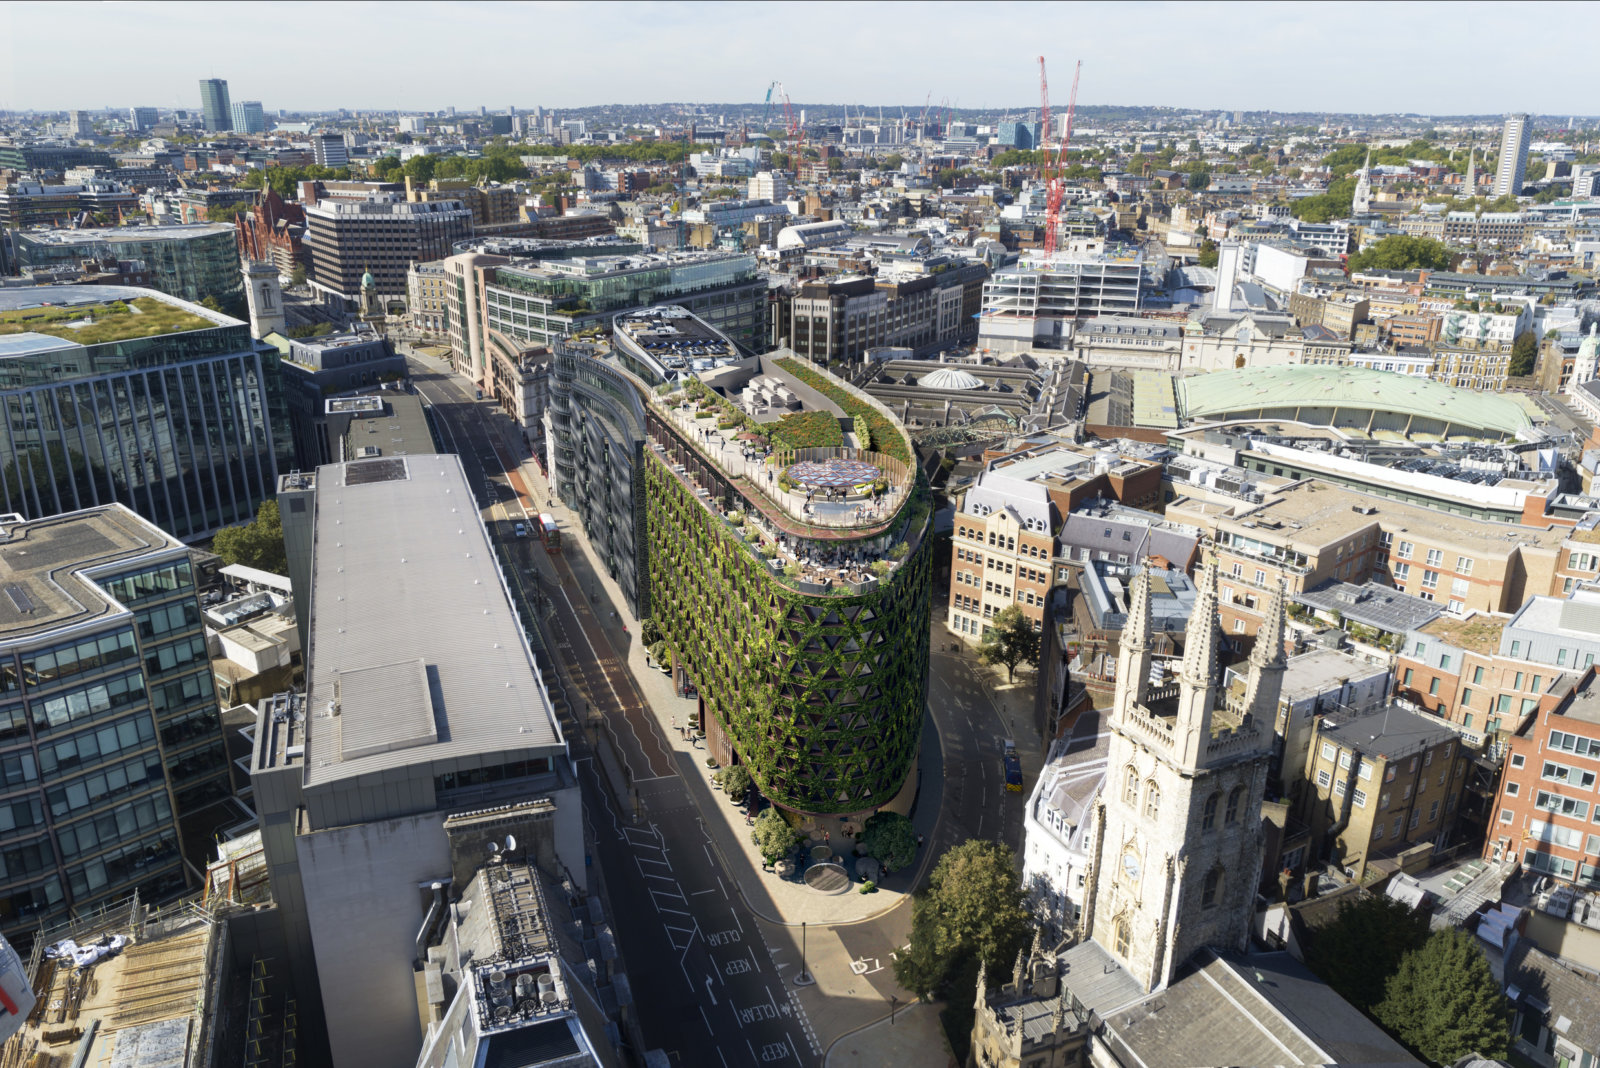 London Cityscape as it will look featuring new living wall